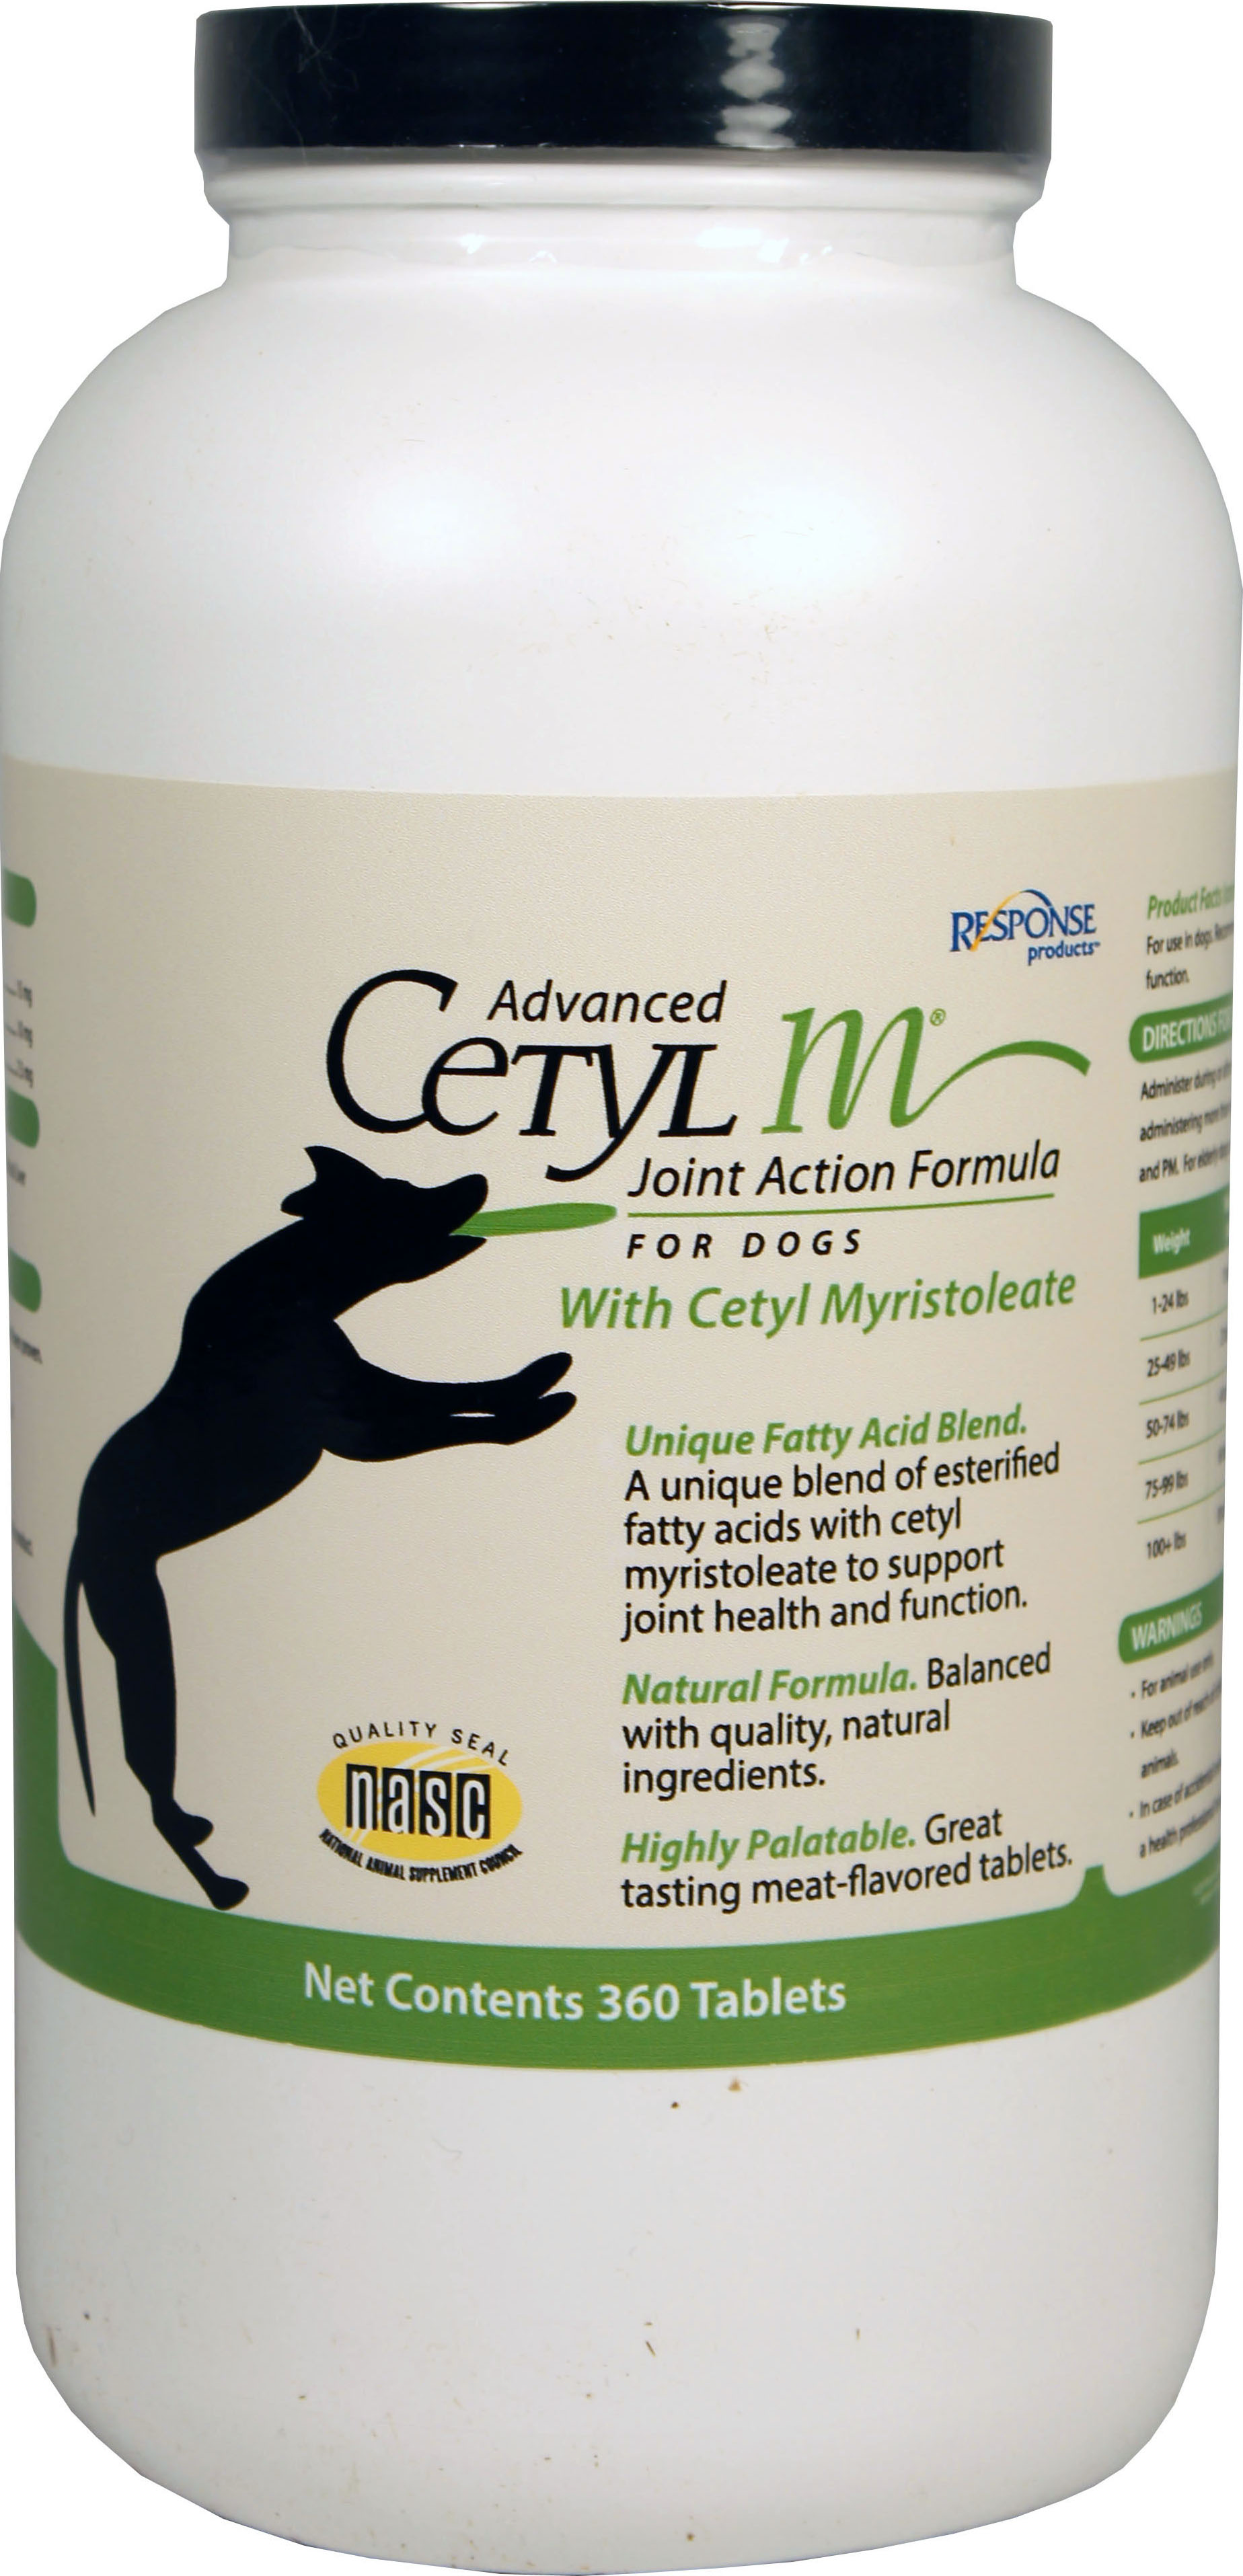 Advanced Cetyl M Joint Action Formula For Dogs (Option 1: 360 Count)